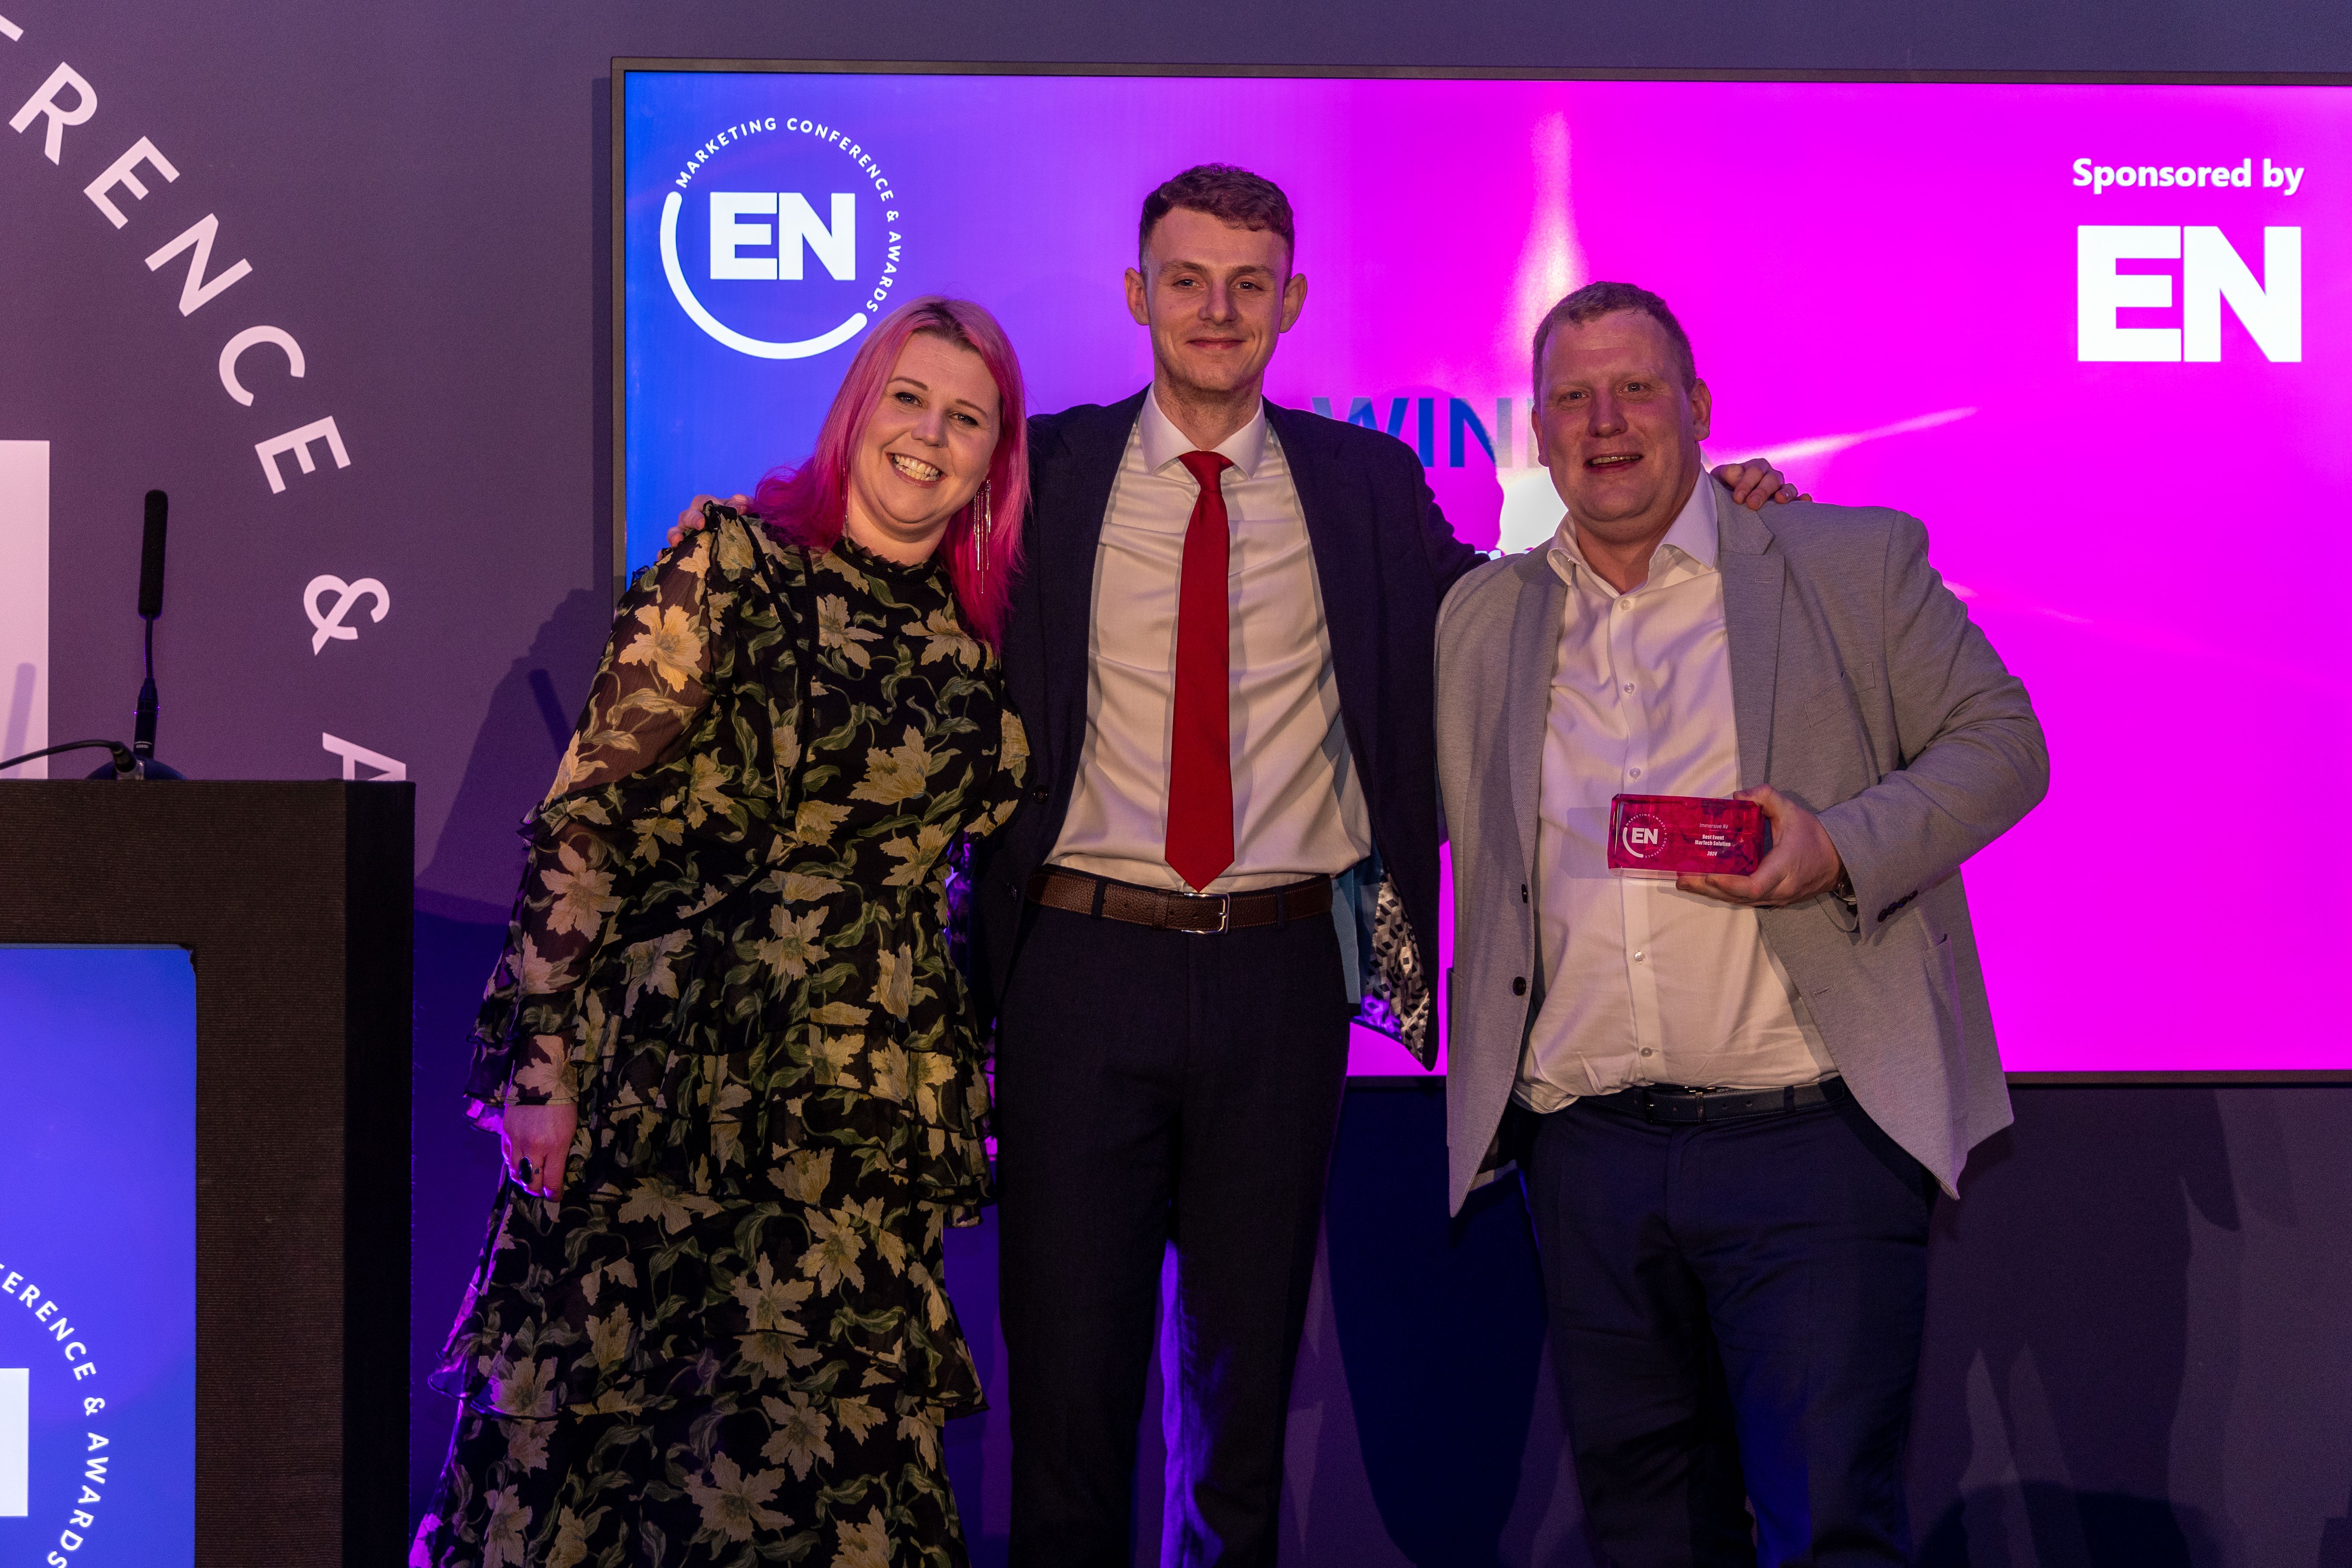 Best Event MarTech Solution sponsored by Exhibition News 